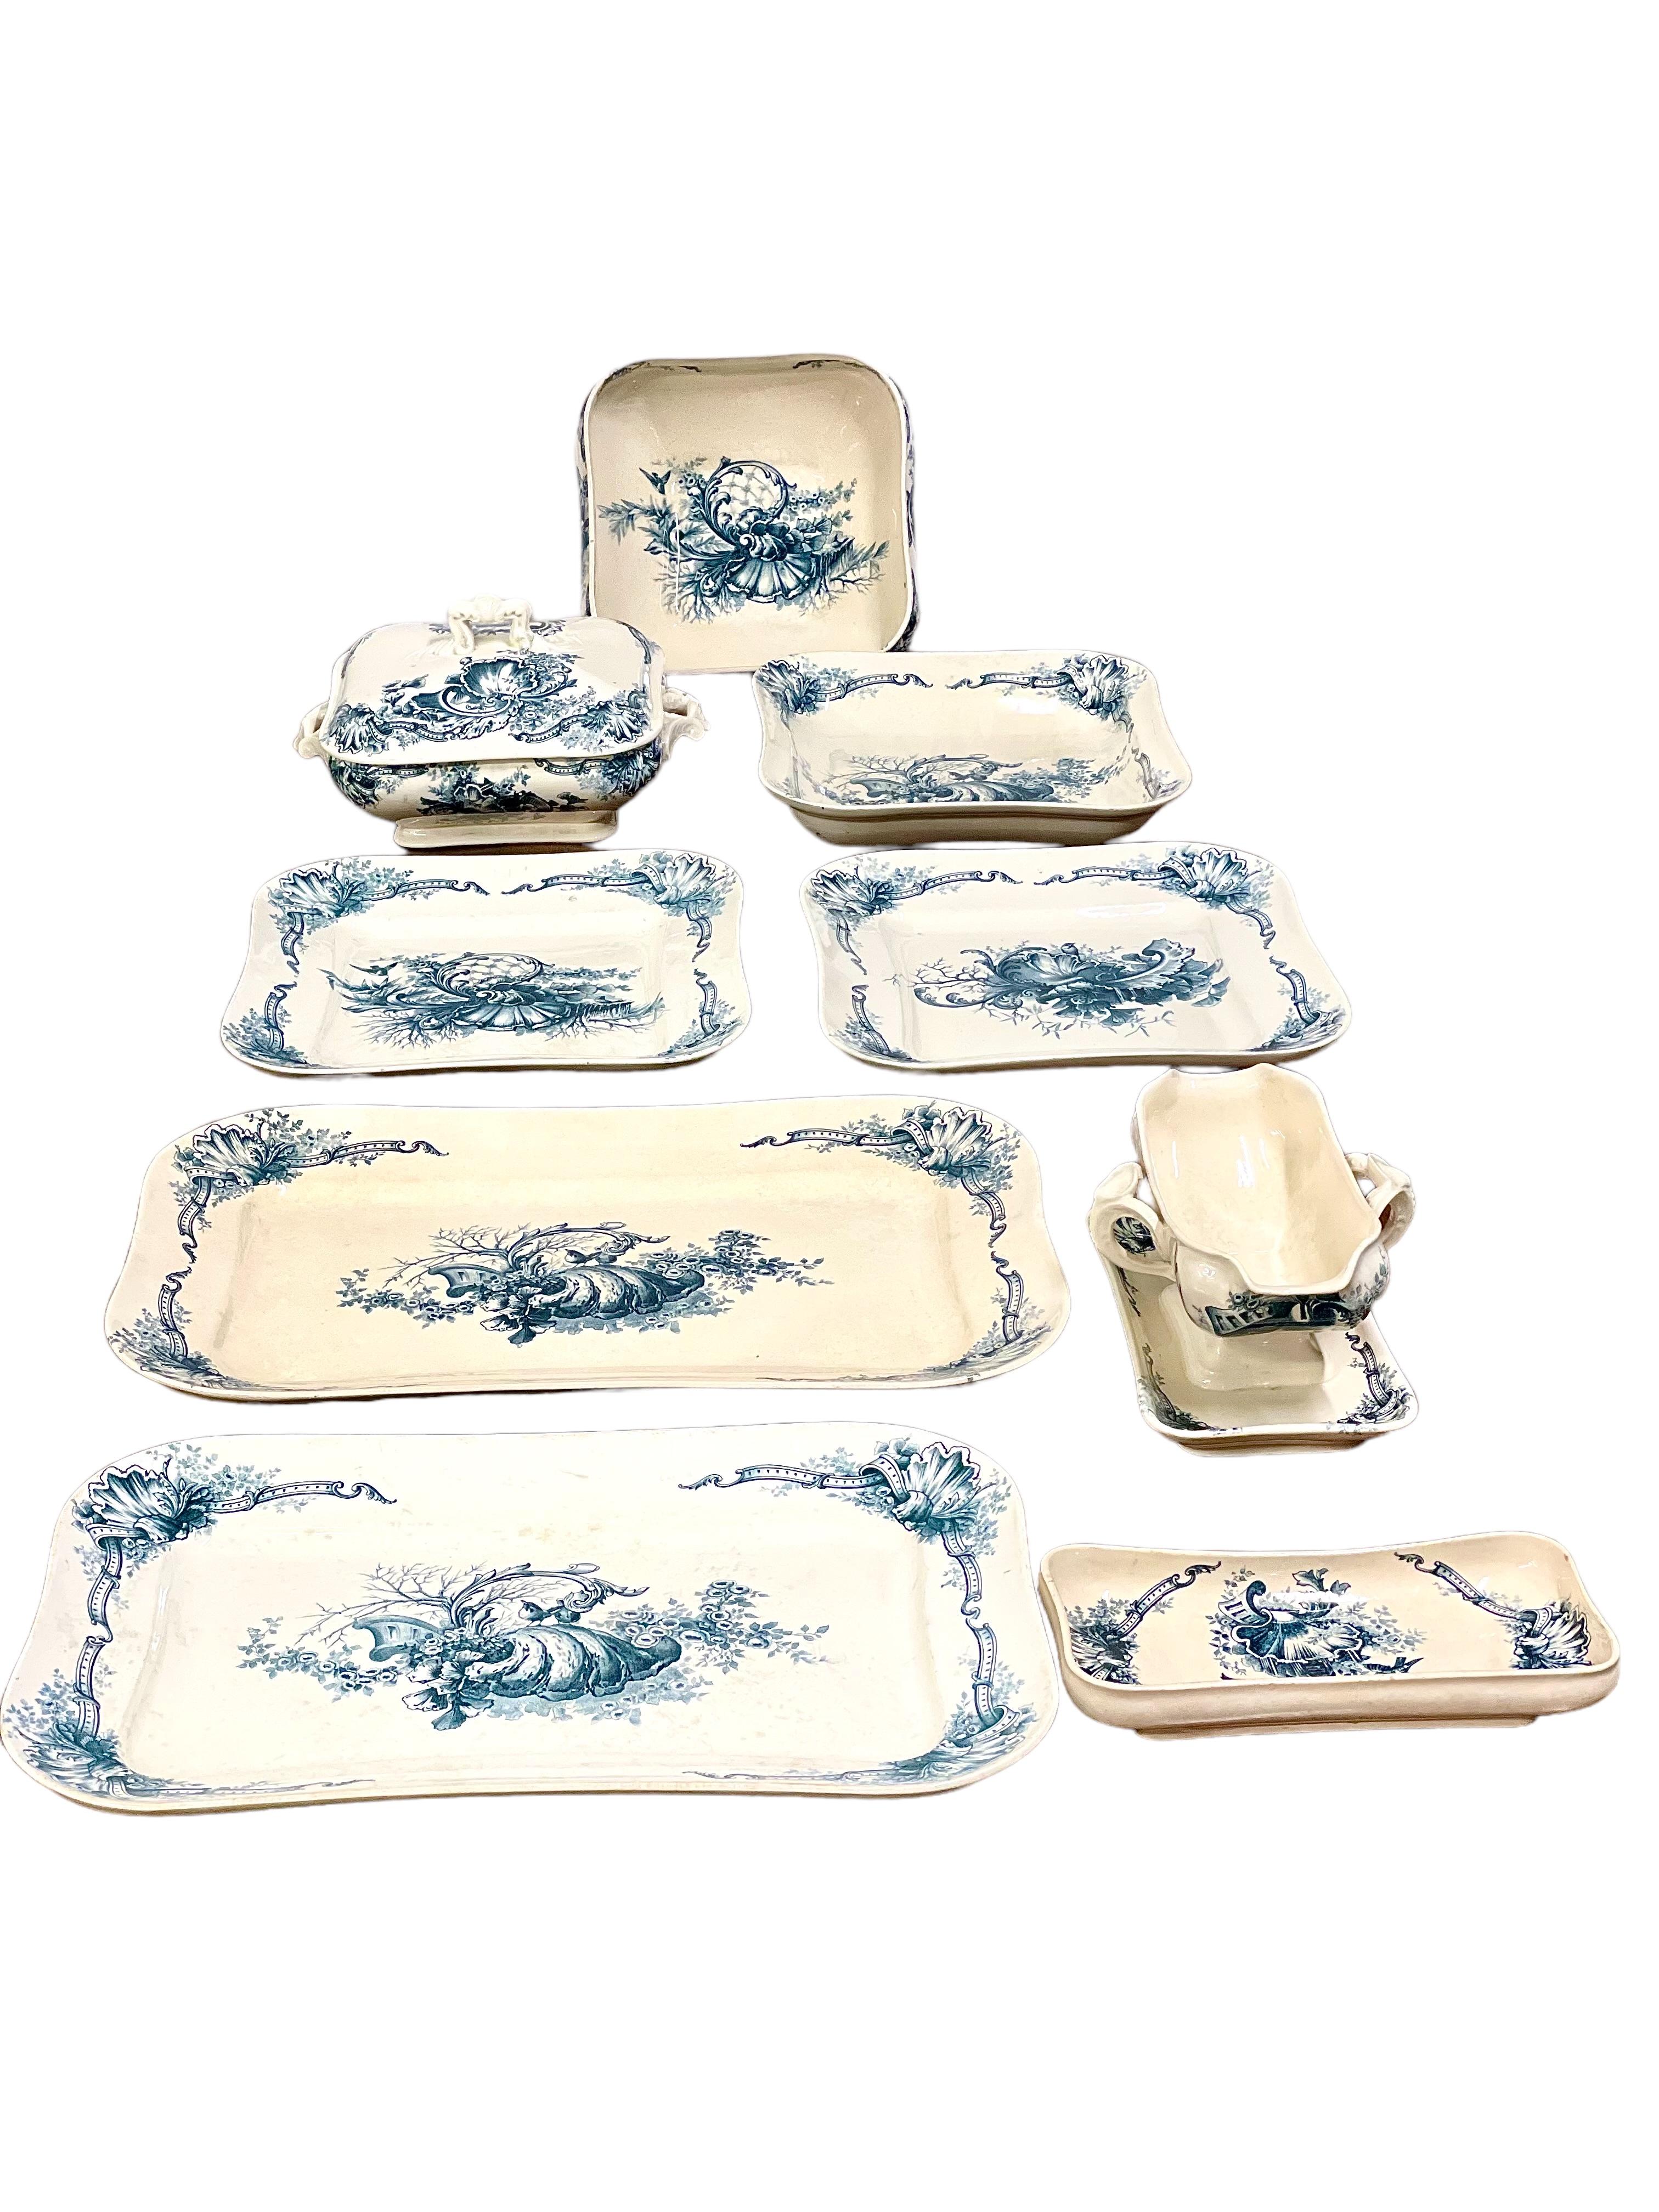 Louis XV Antique French Blue and White Ironstone Dinner Set by Hautin Boulenger & Cie For Sale